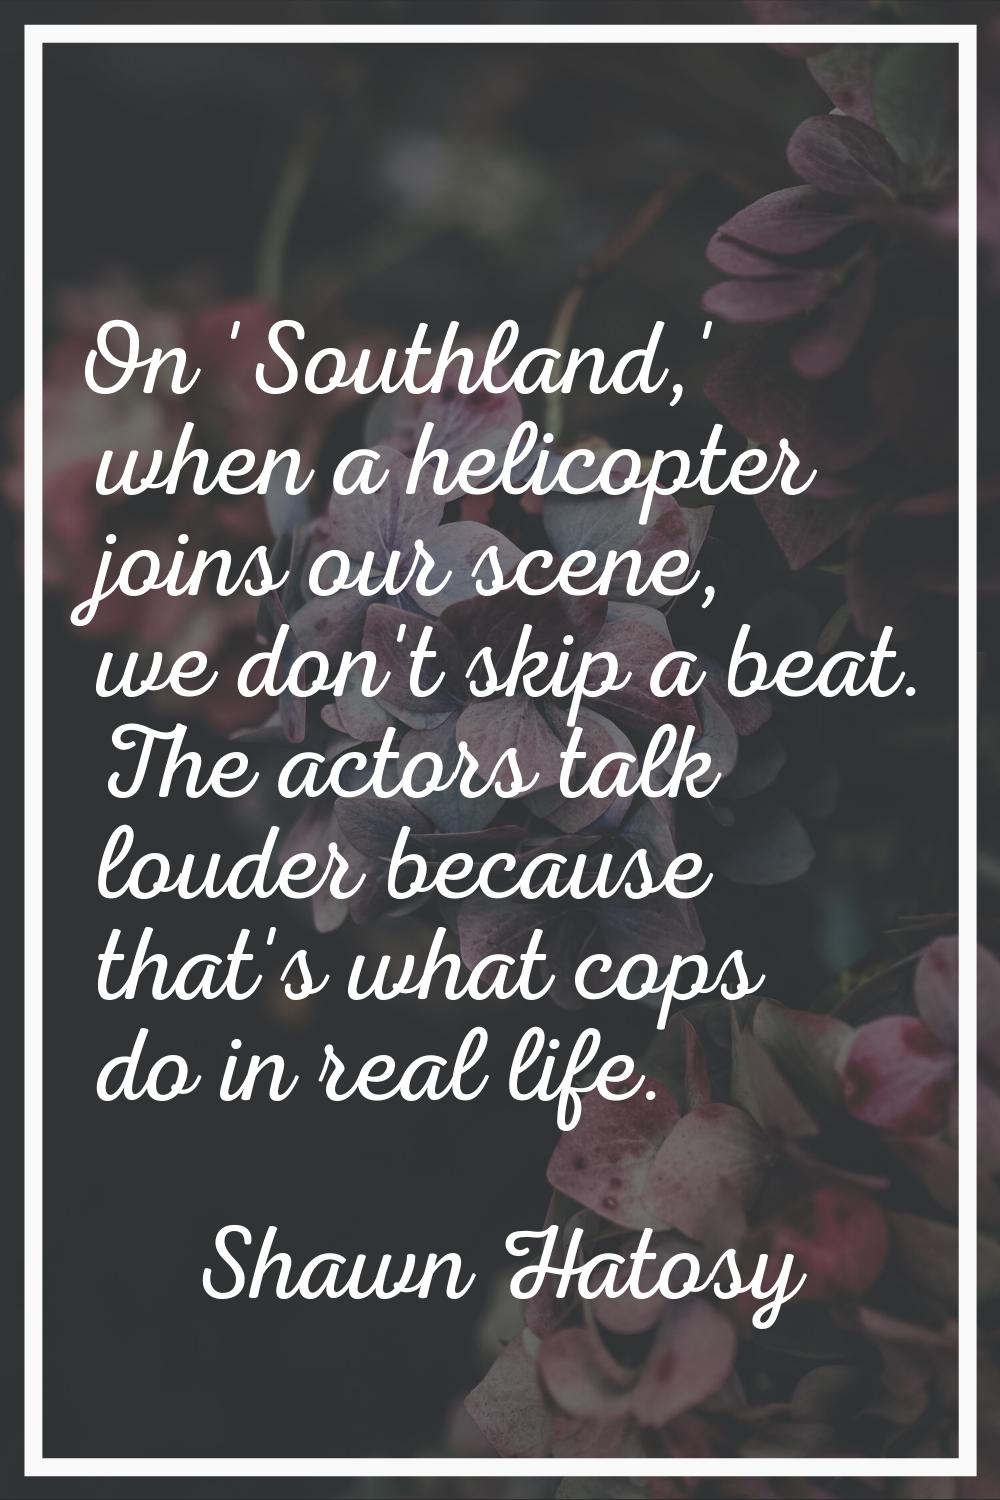 On 'Southland,' when a helicopter joins our scene, we don't skip a beat. The actors talk louder bec